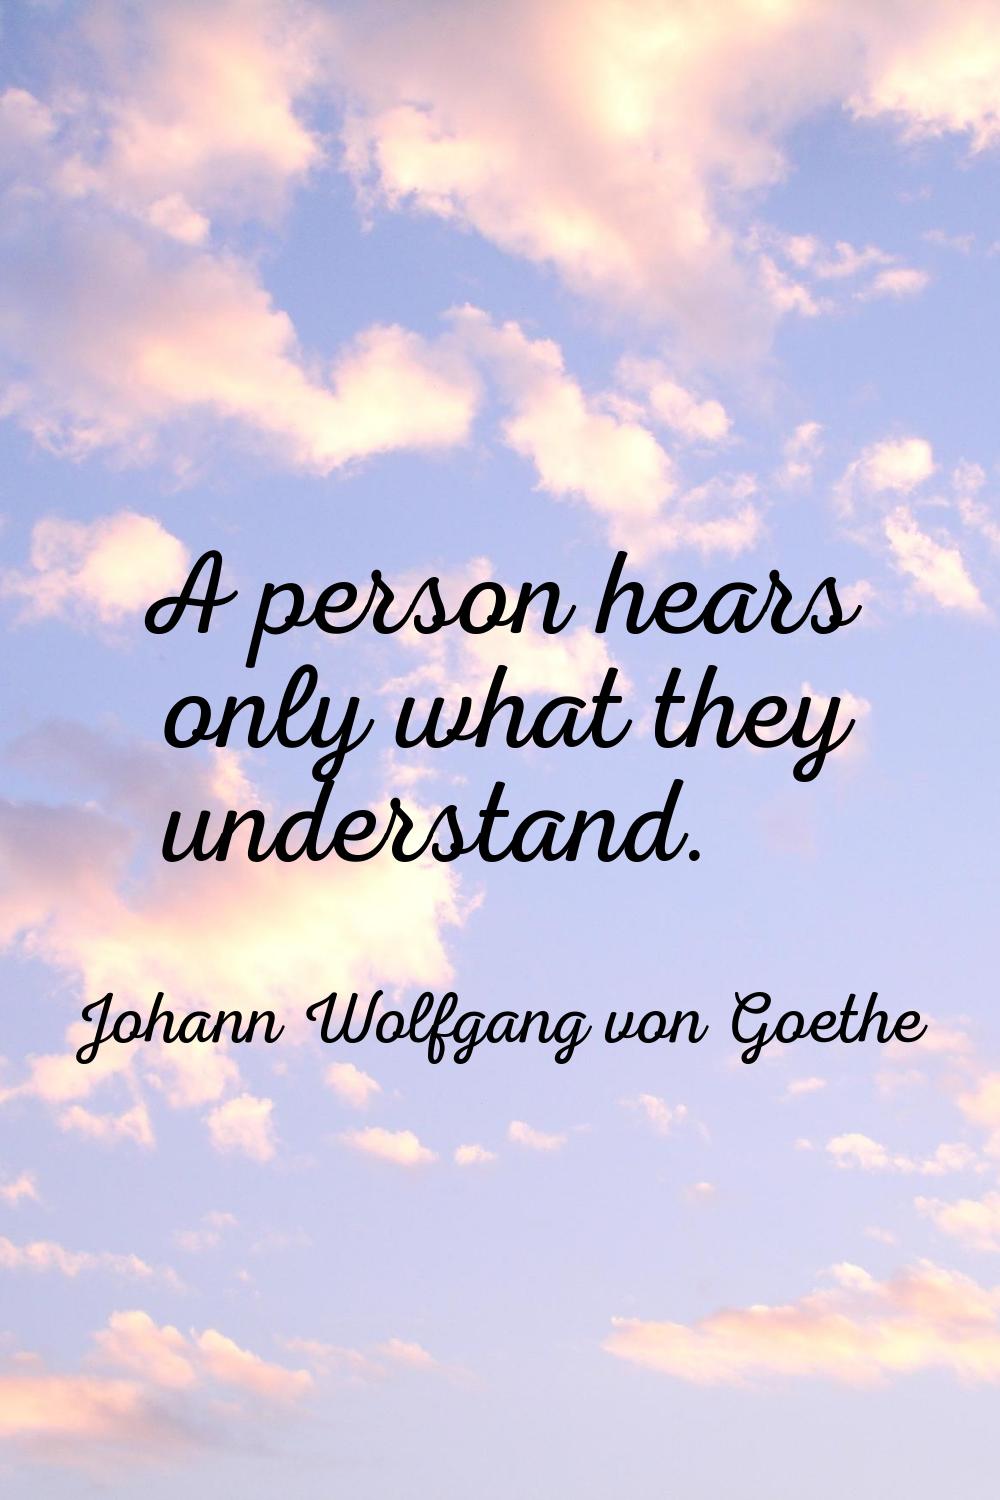 A person hears only what they understand.